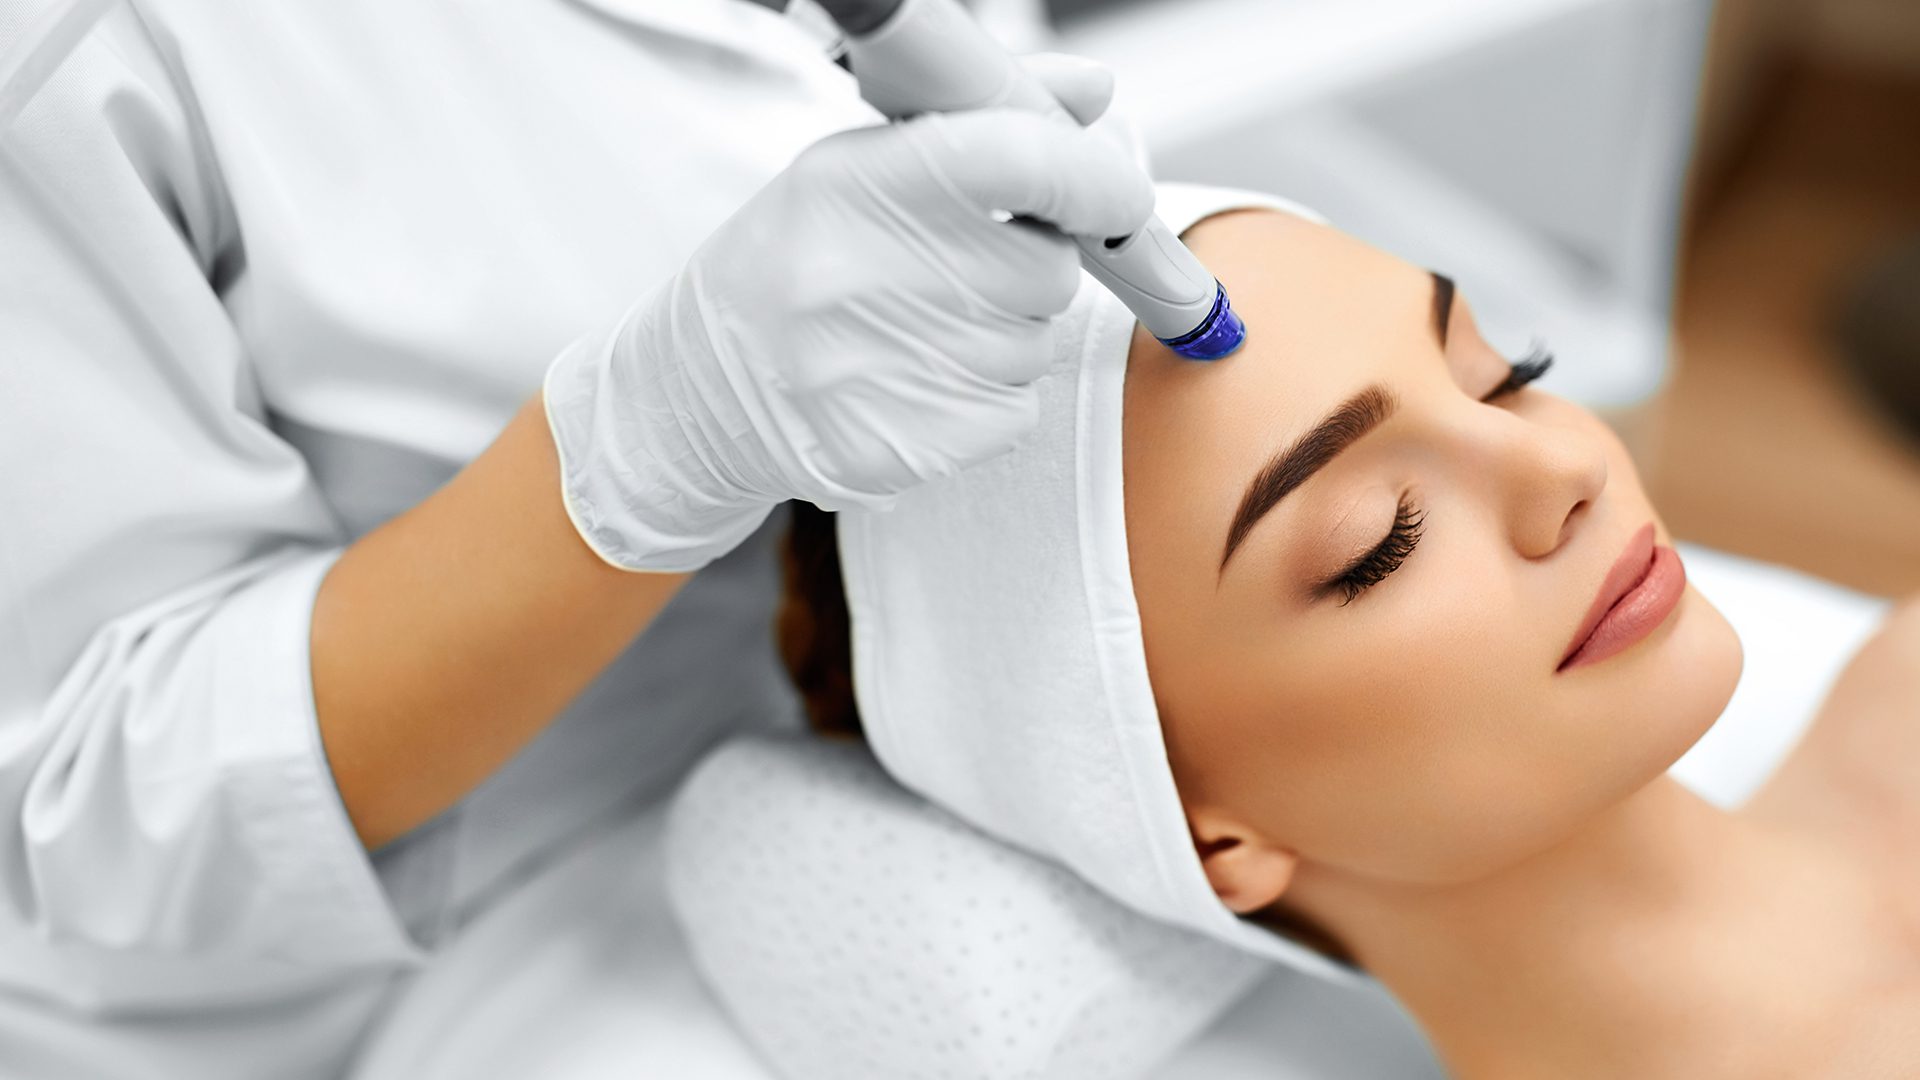 Aesthetic medicine offers non-surgical treatments in just a few sessions (Getty Images)